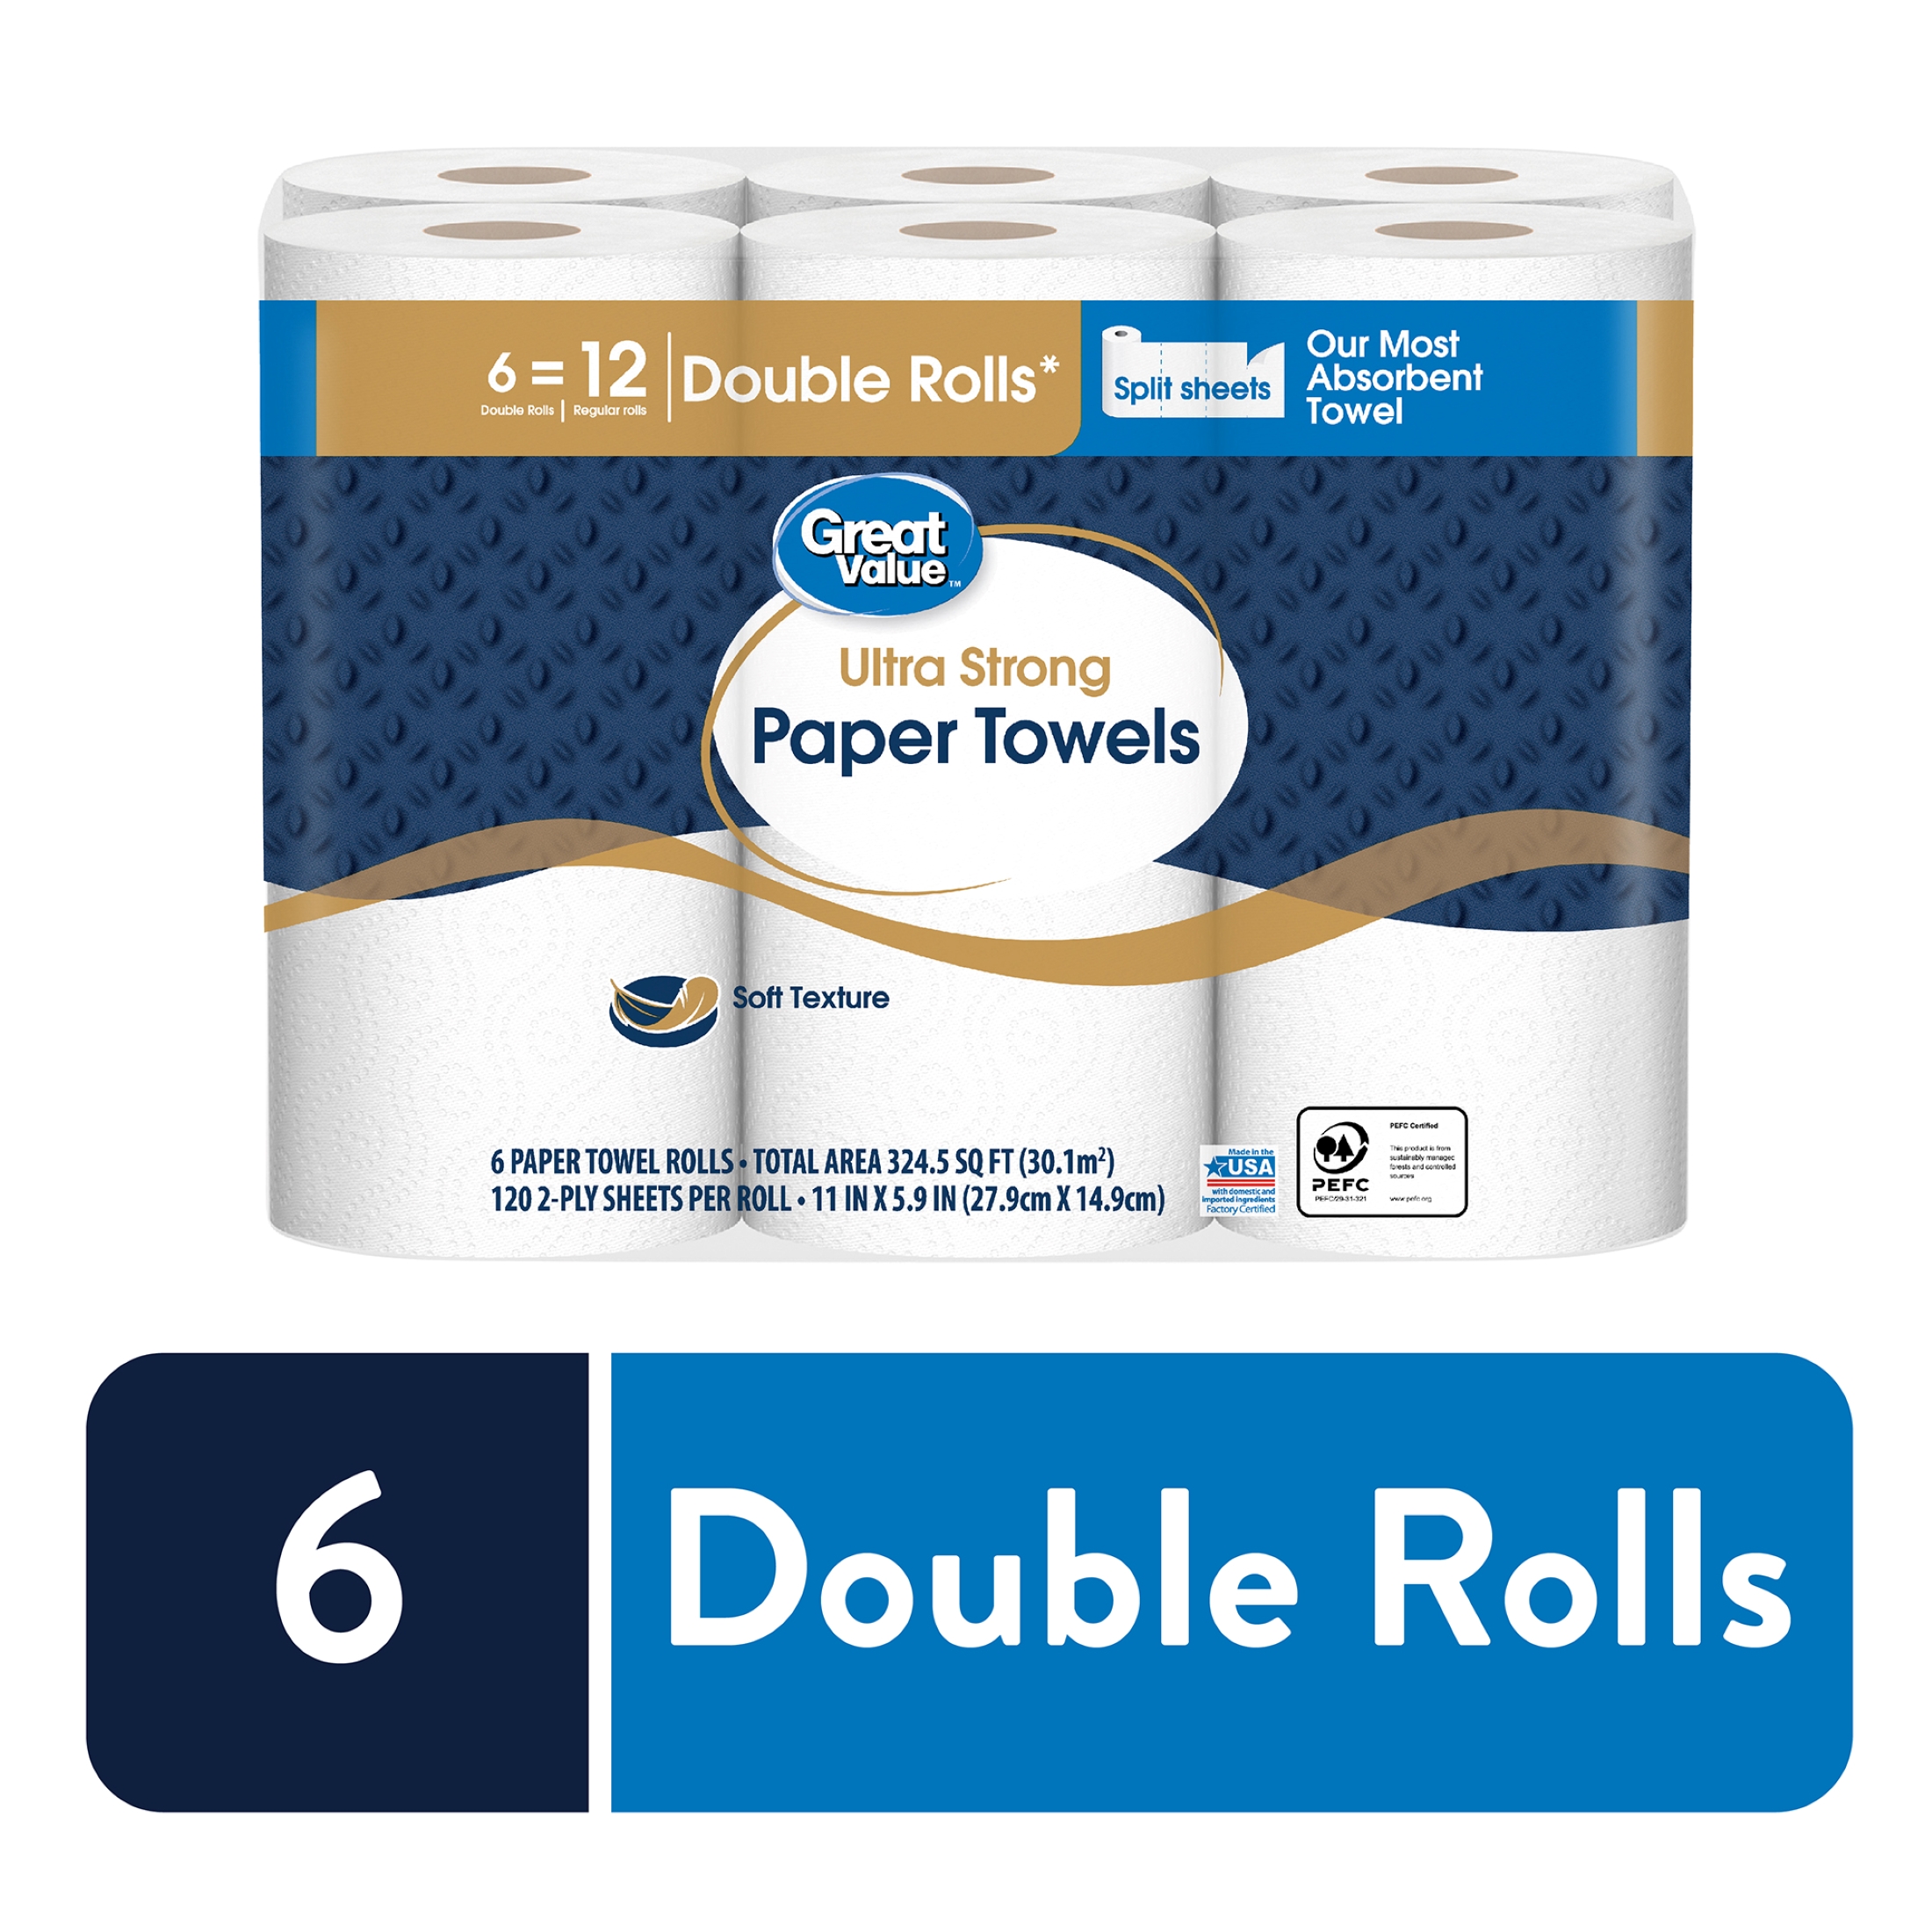 Great Value Ultra Strong Paper Towels, Split Sheets, 6 Double Rolls - image 1 of 9